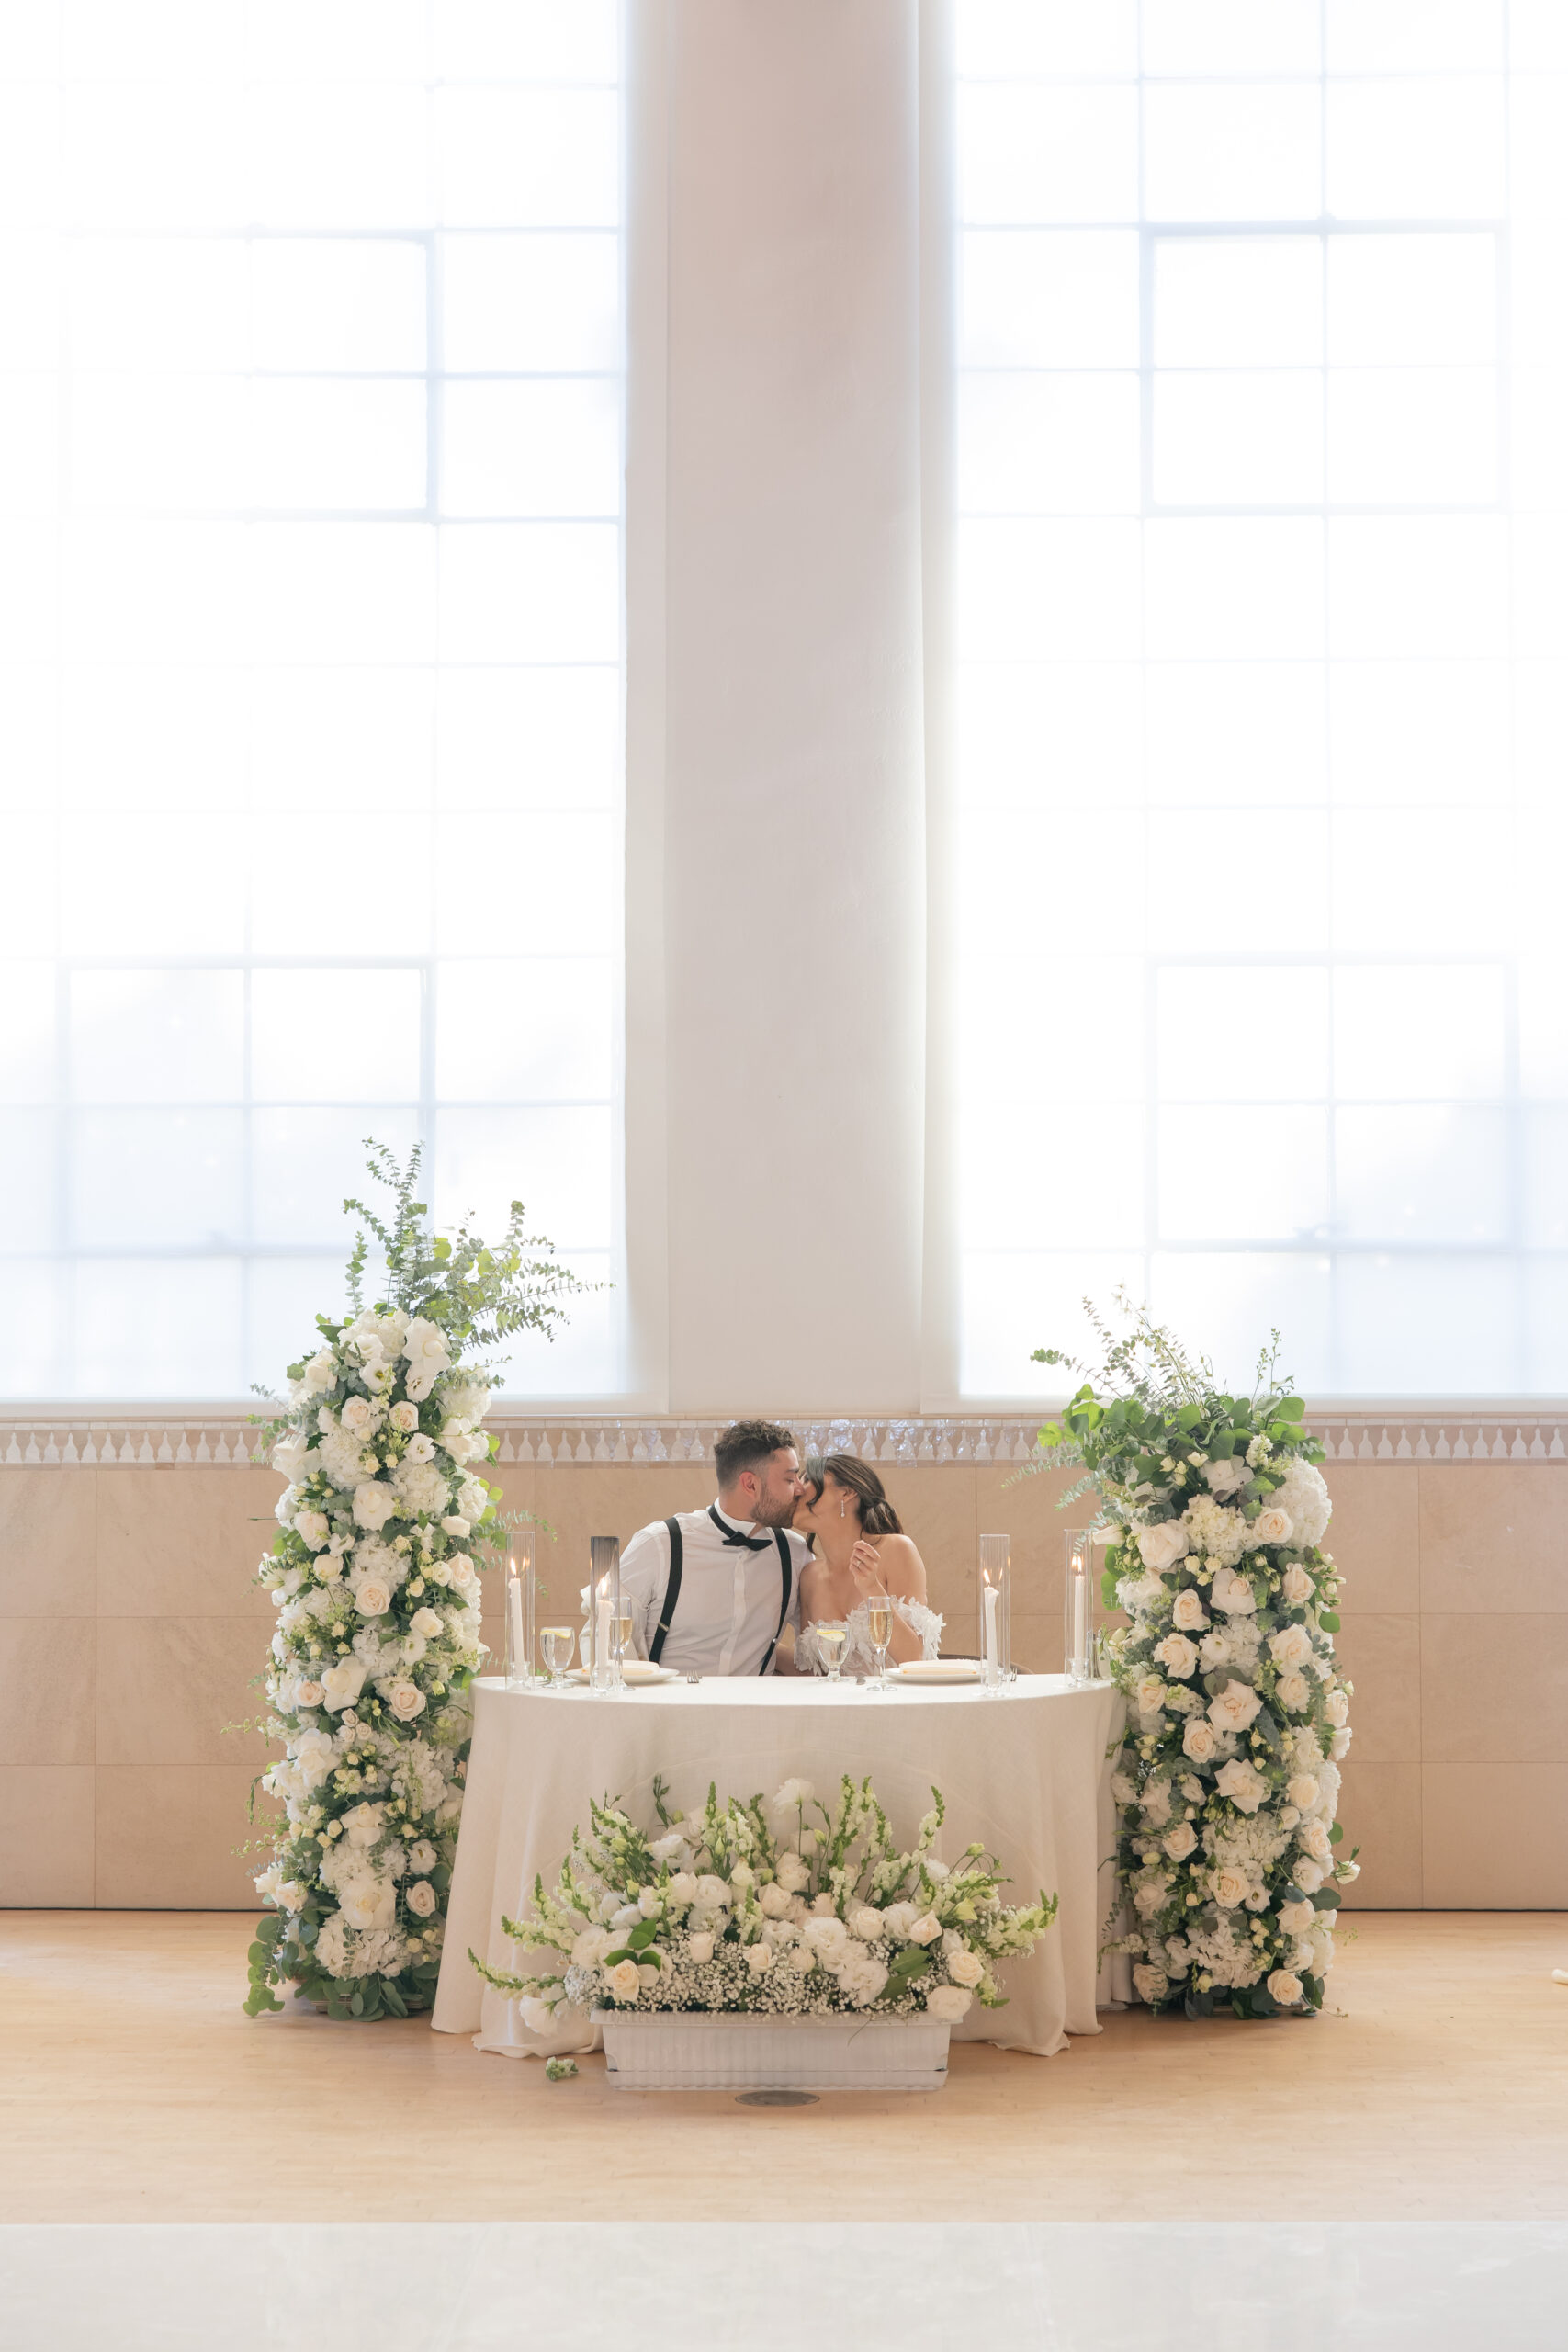 Romantic wedding sweetheart table with freestanding floral arrangements at Grand Gimeno.